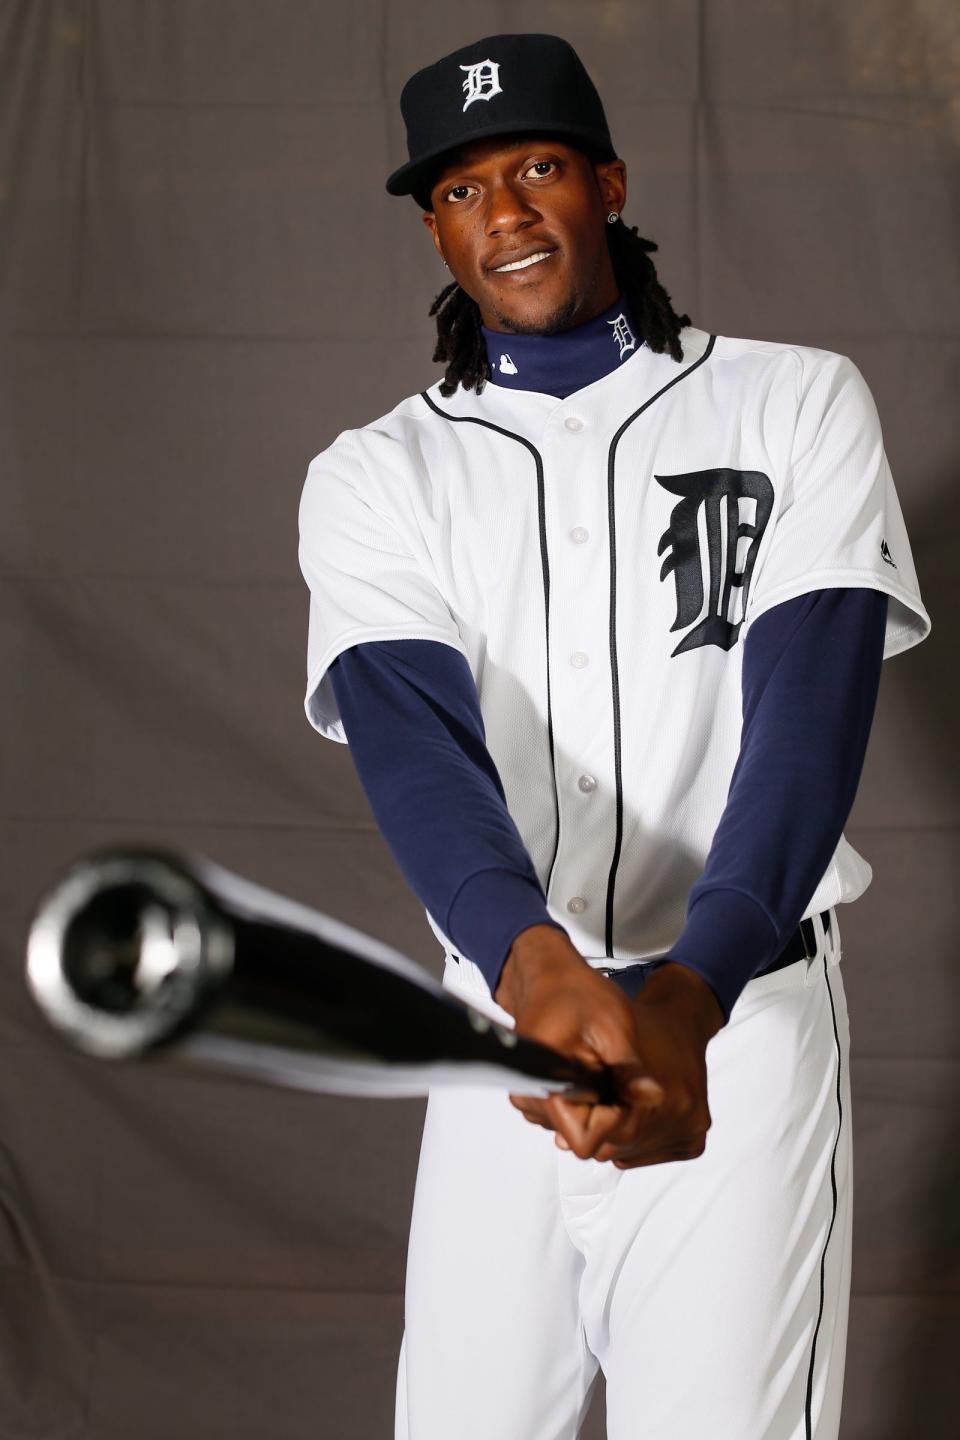 Tigers outfielder Cameron Maybin gets his picture taken on "Photo Day" during the Tigers spring training at Joker Marchant Stadium in Lakeland, Fla. on Saturday, Feb. 27, 2016.